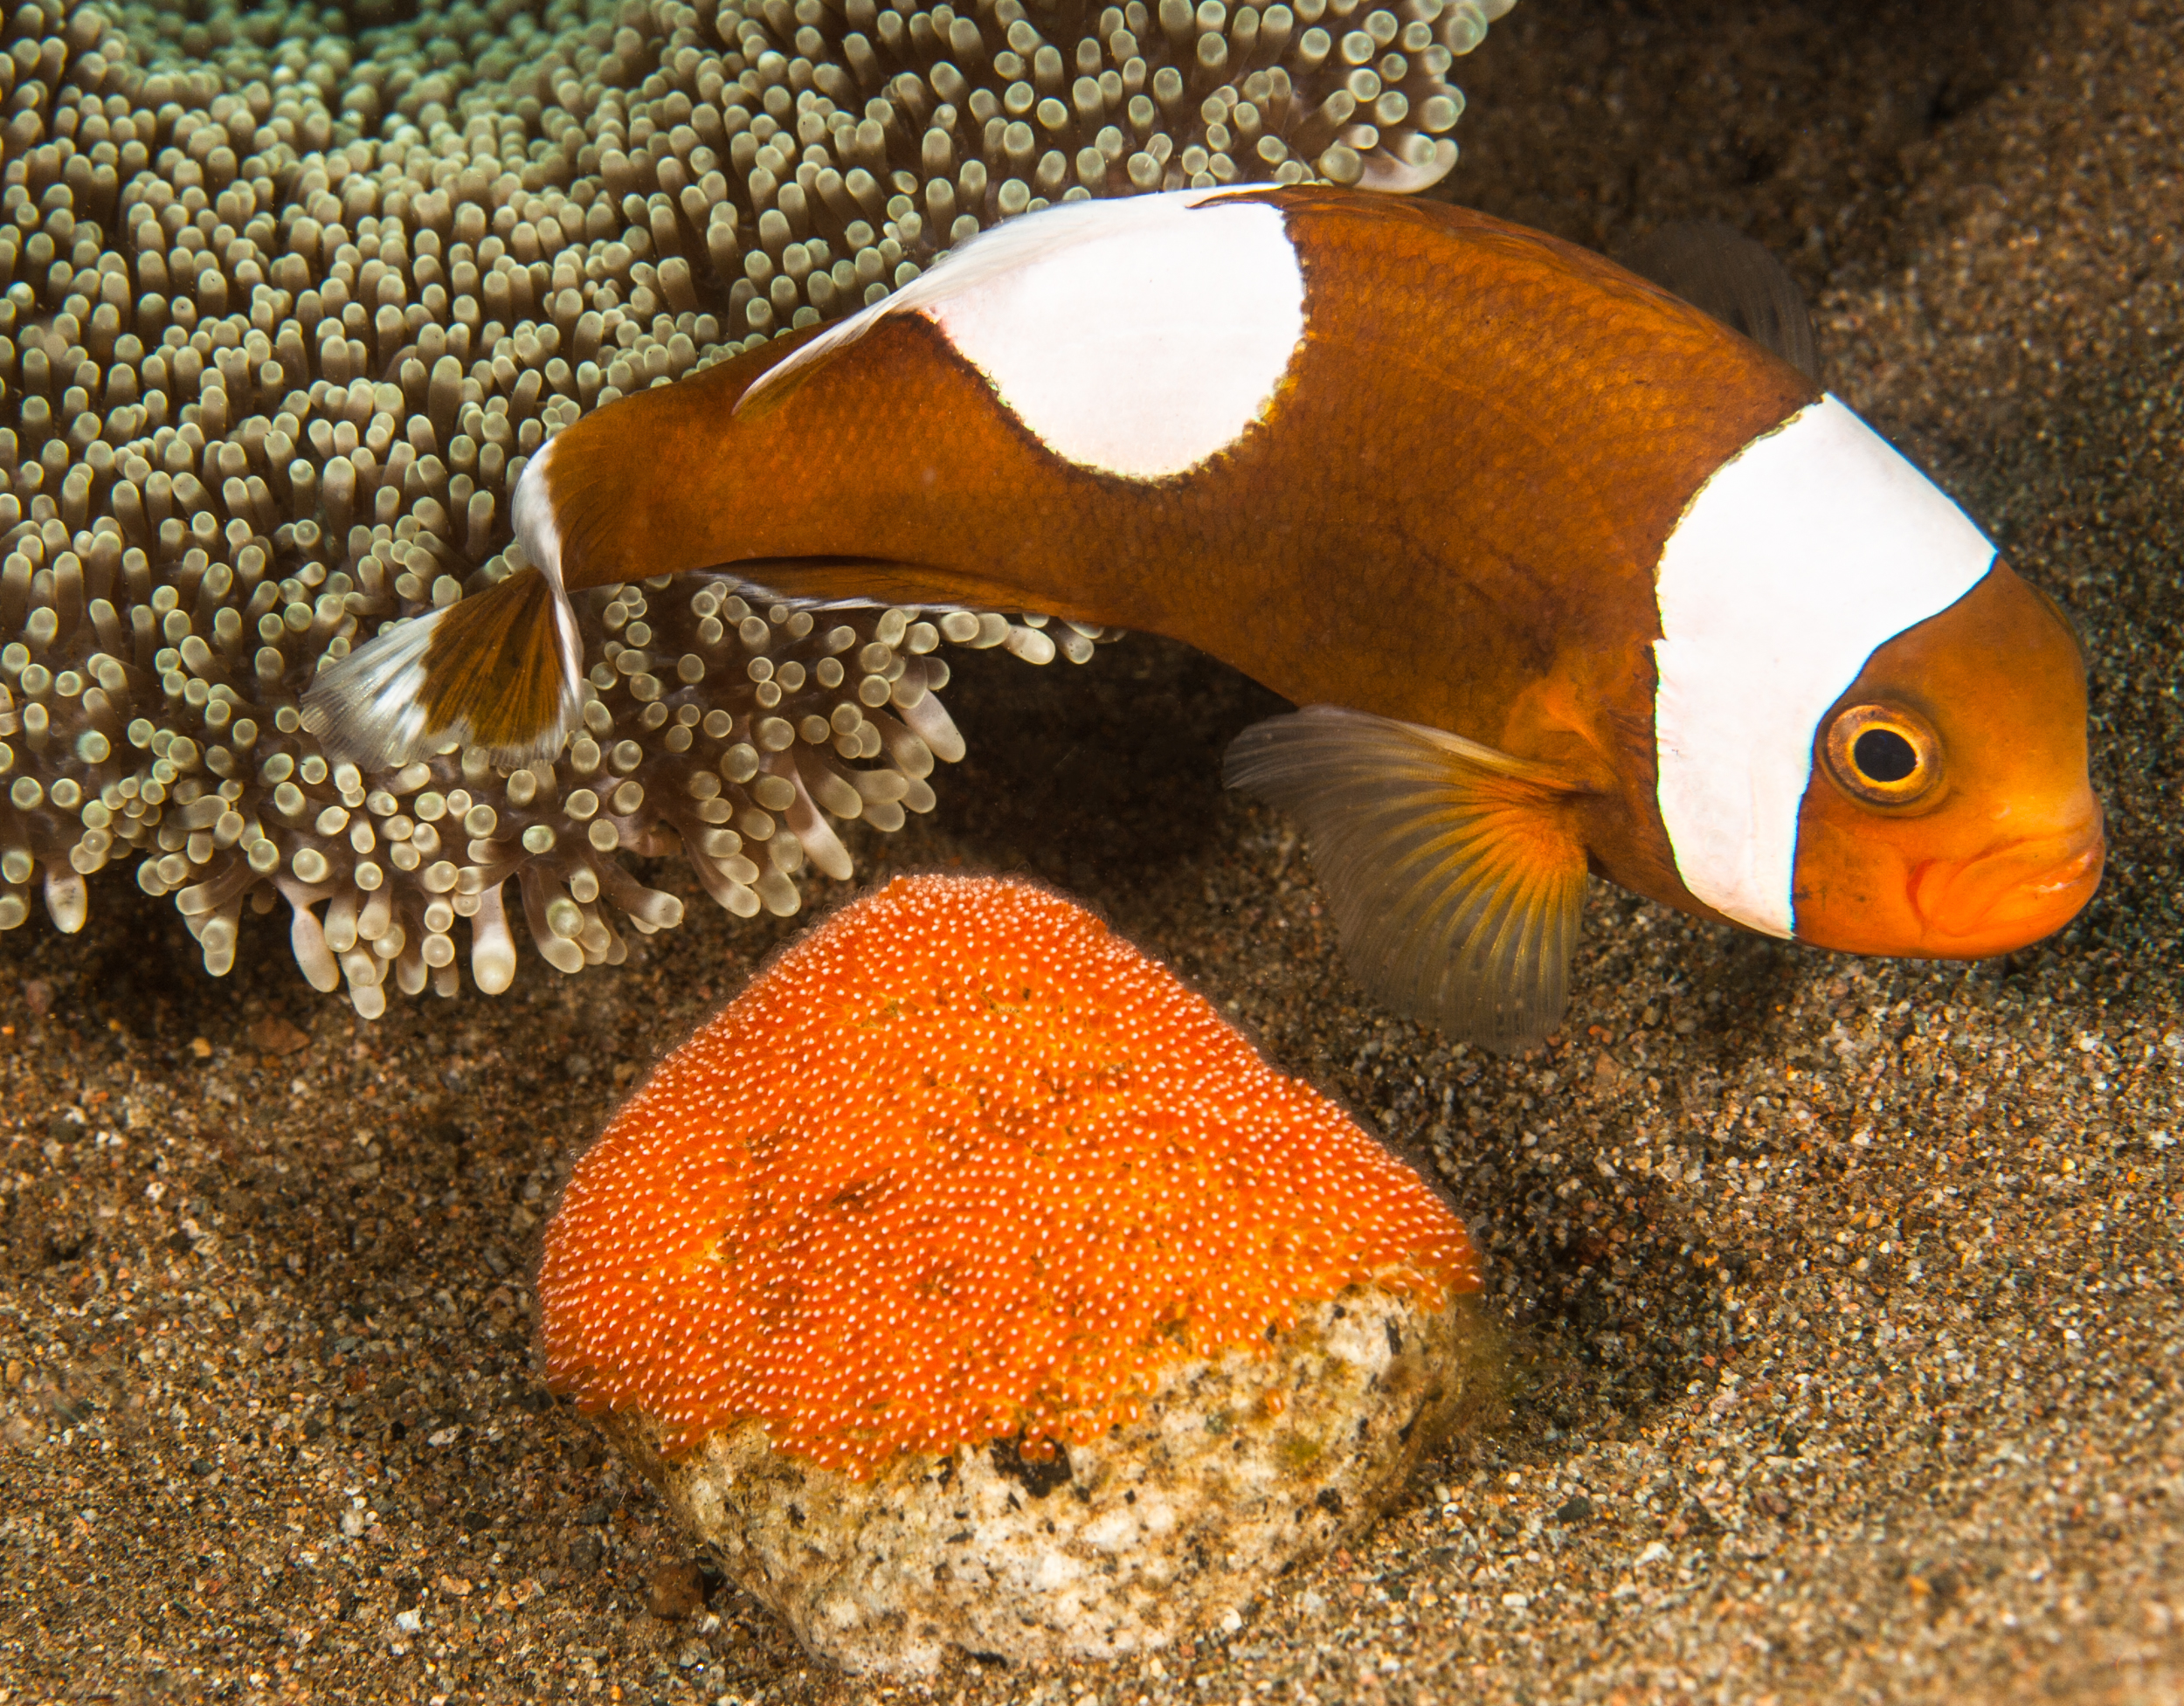 Anemonefish with eggs, by Anita George-Ares